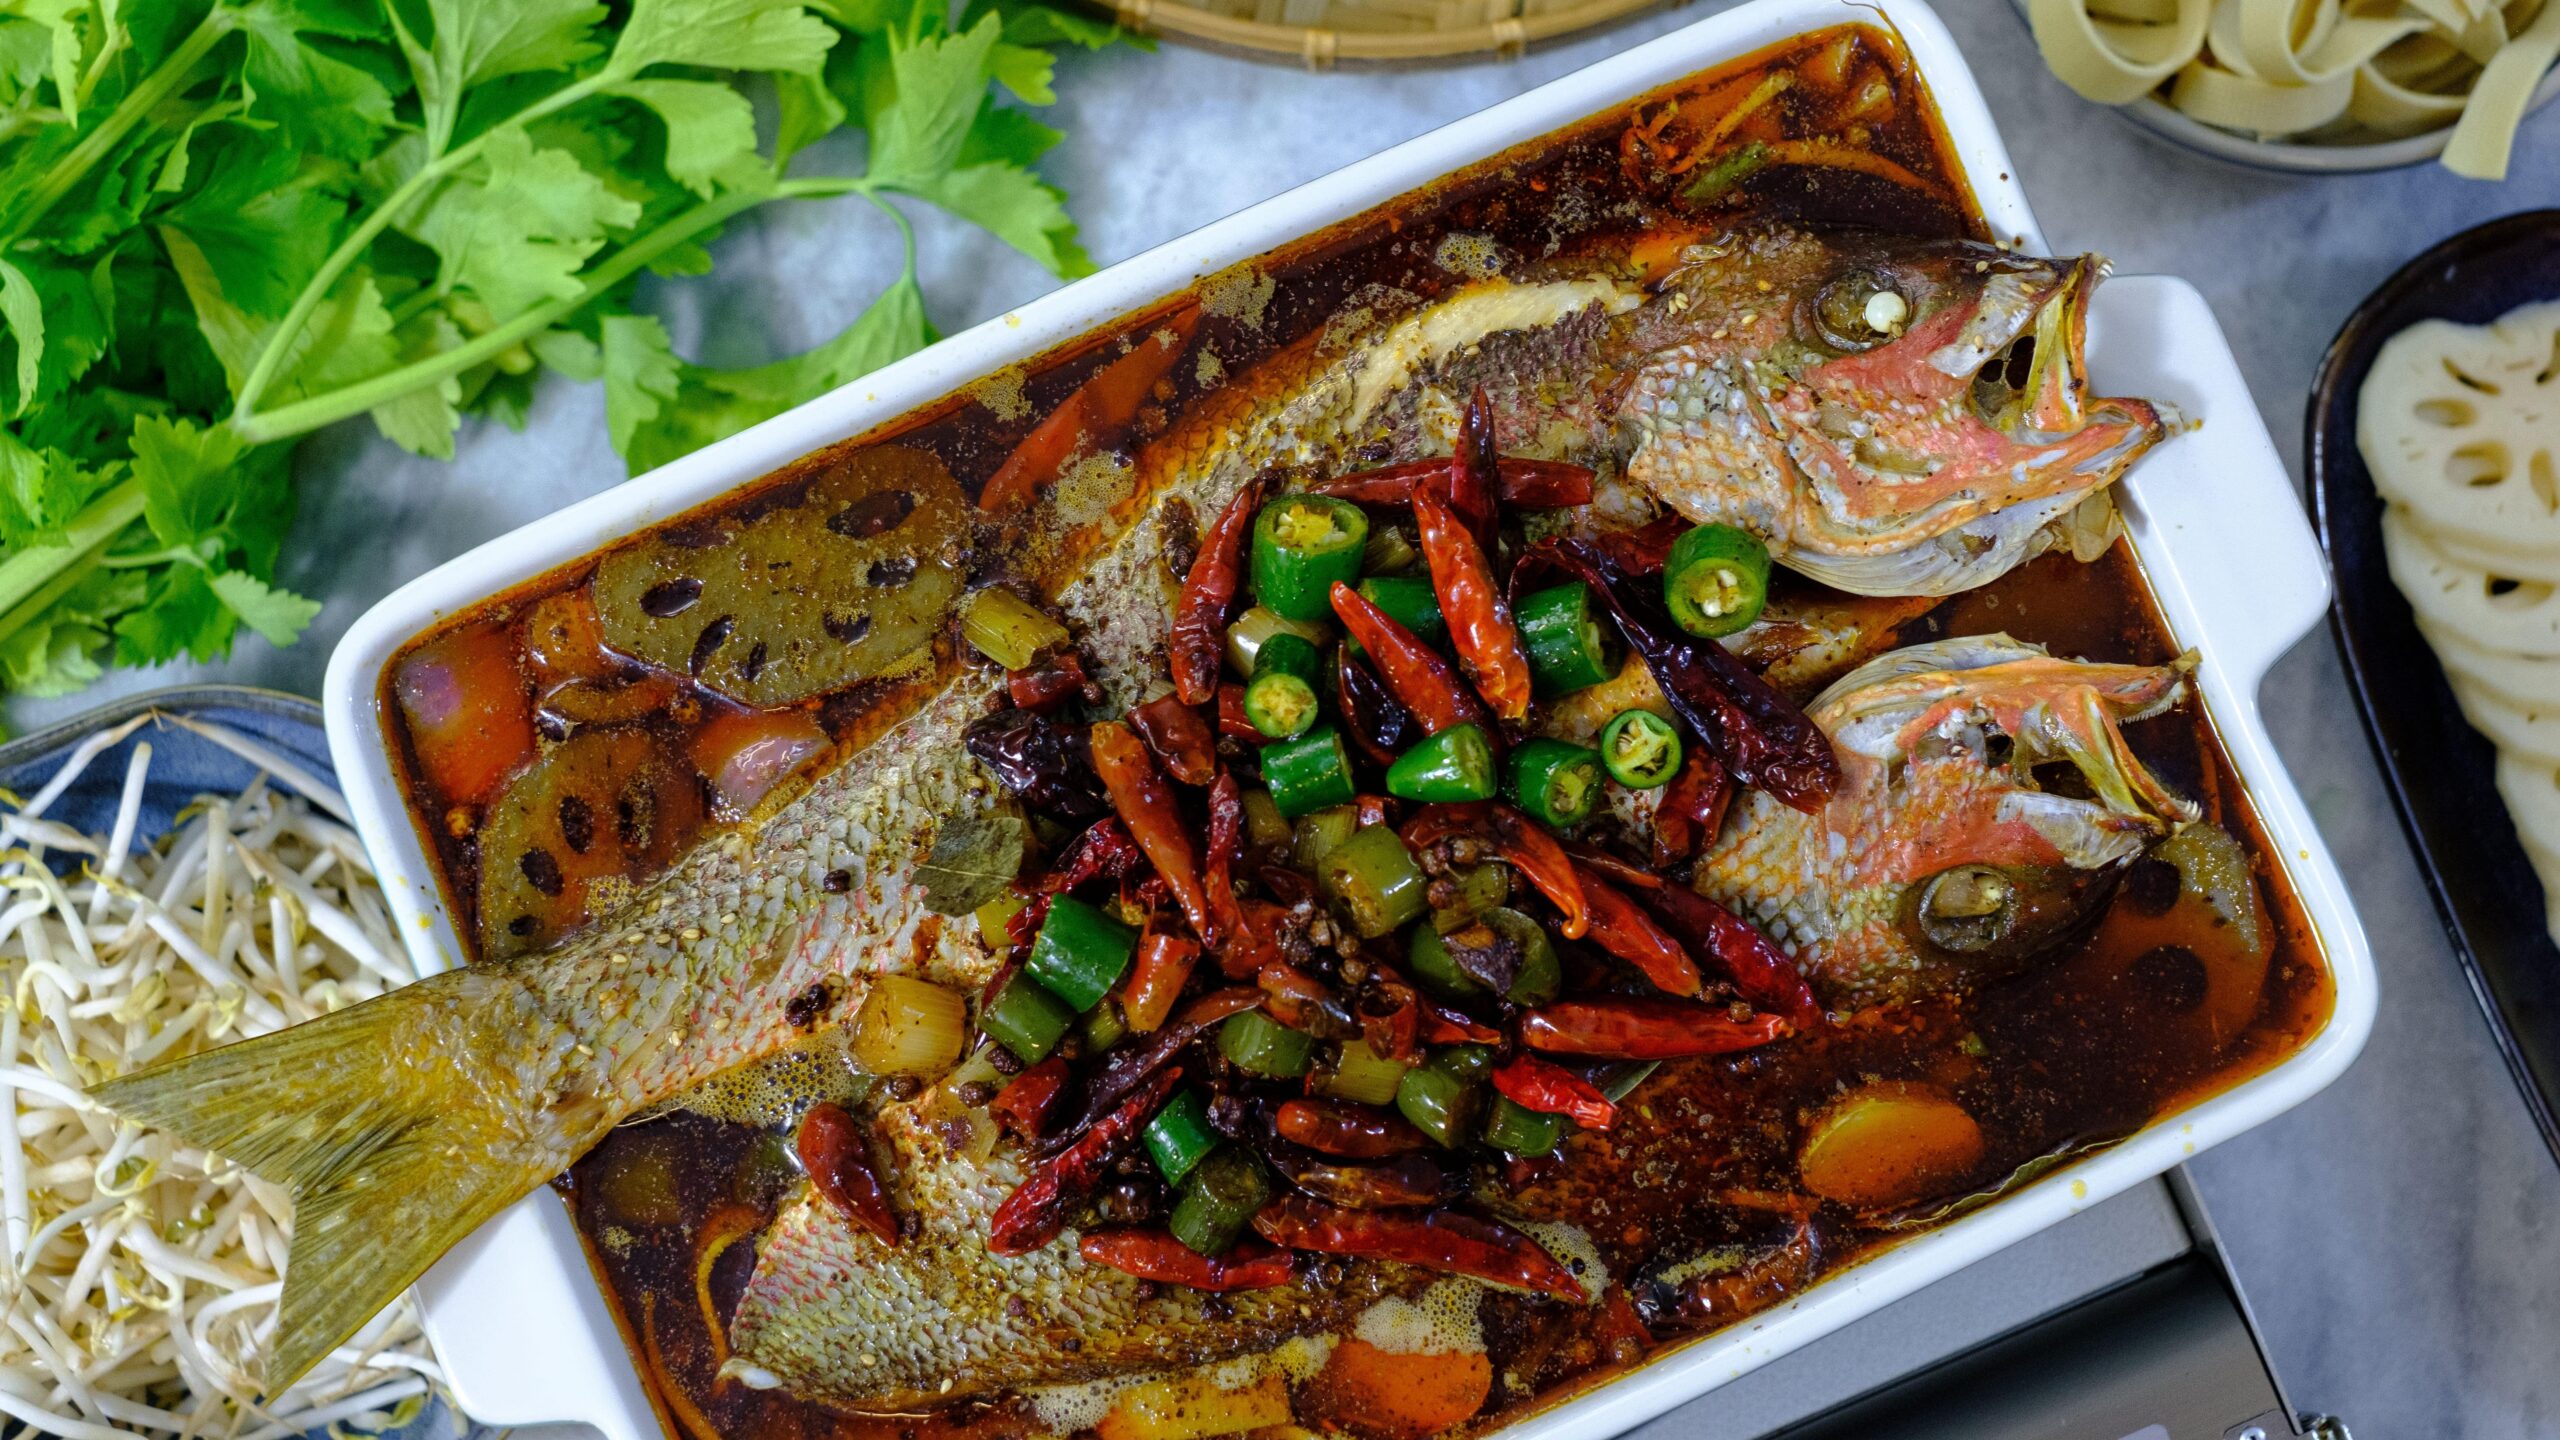  A delicious and healthy seafood recipe.